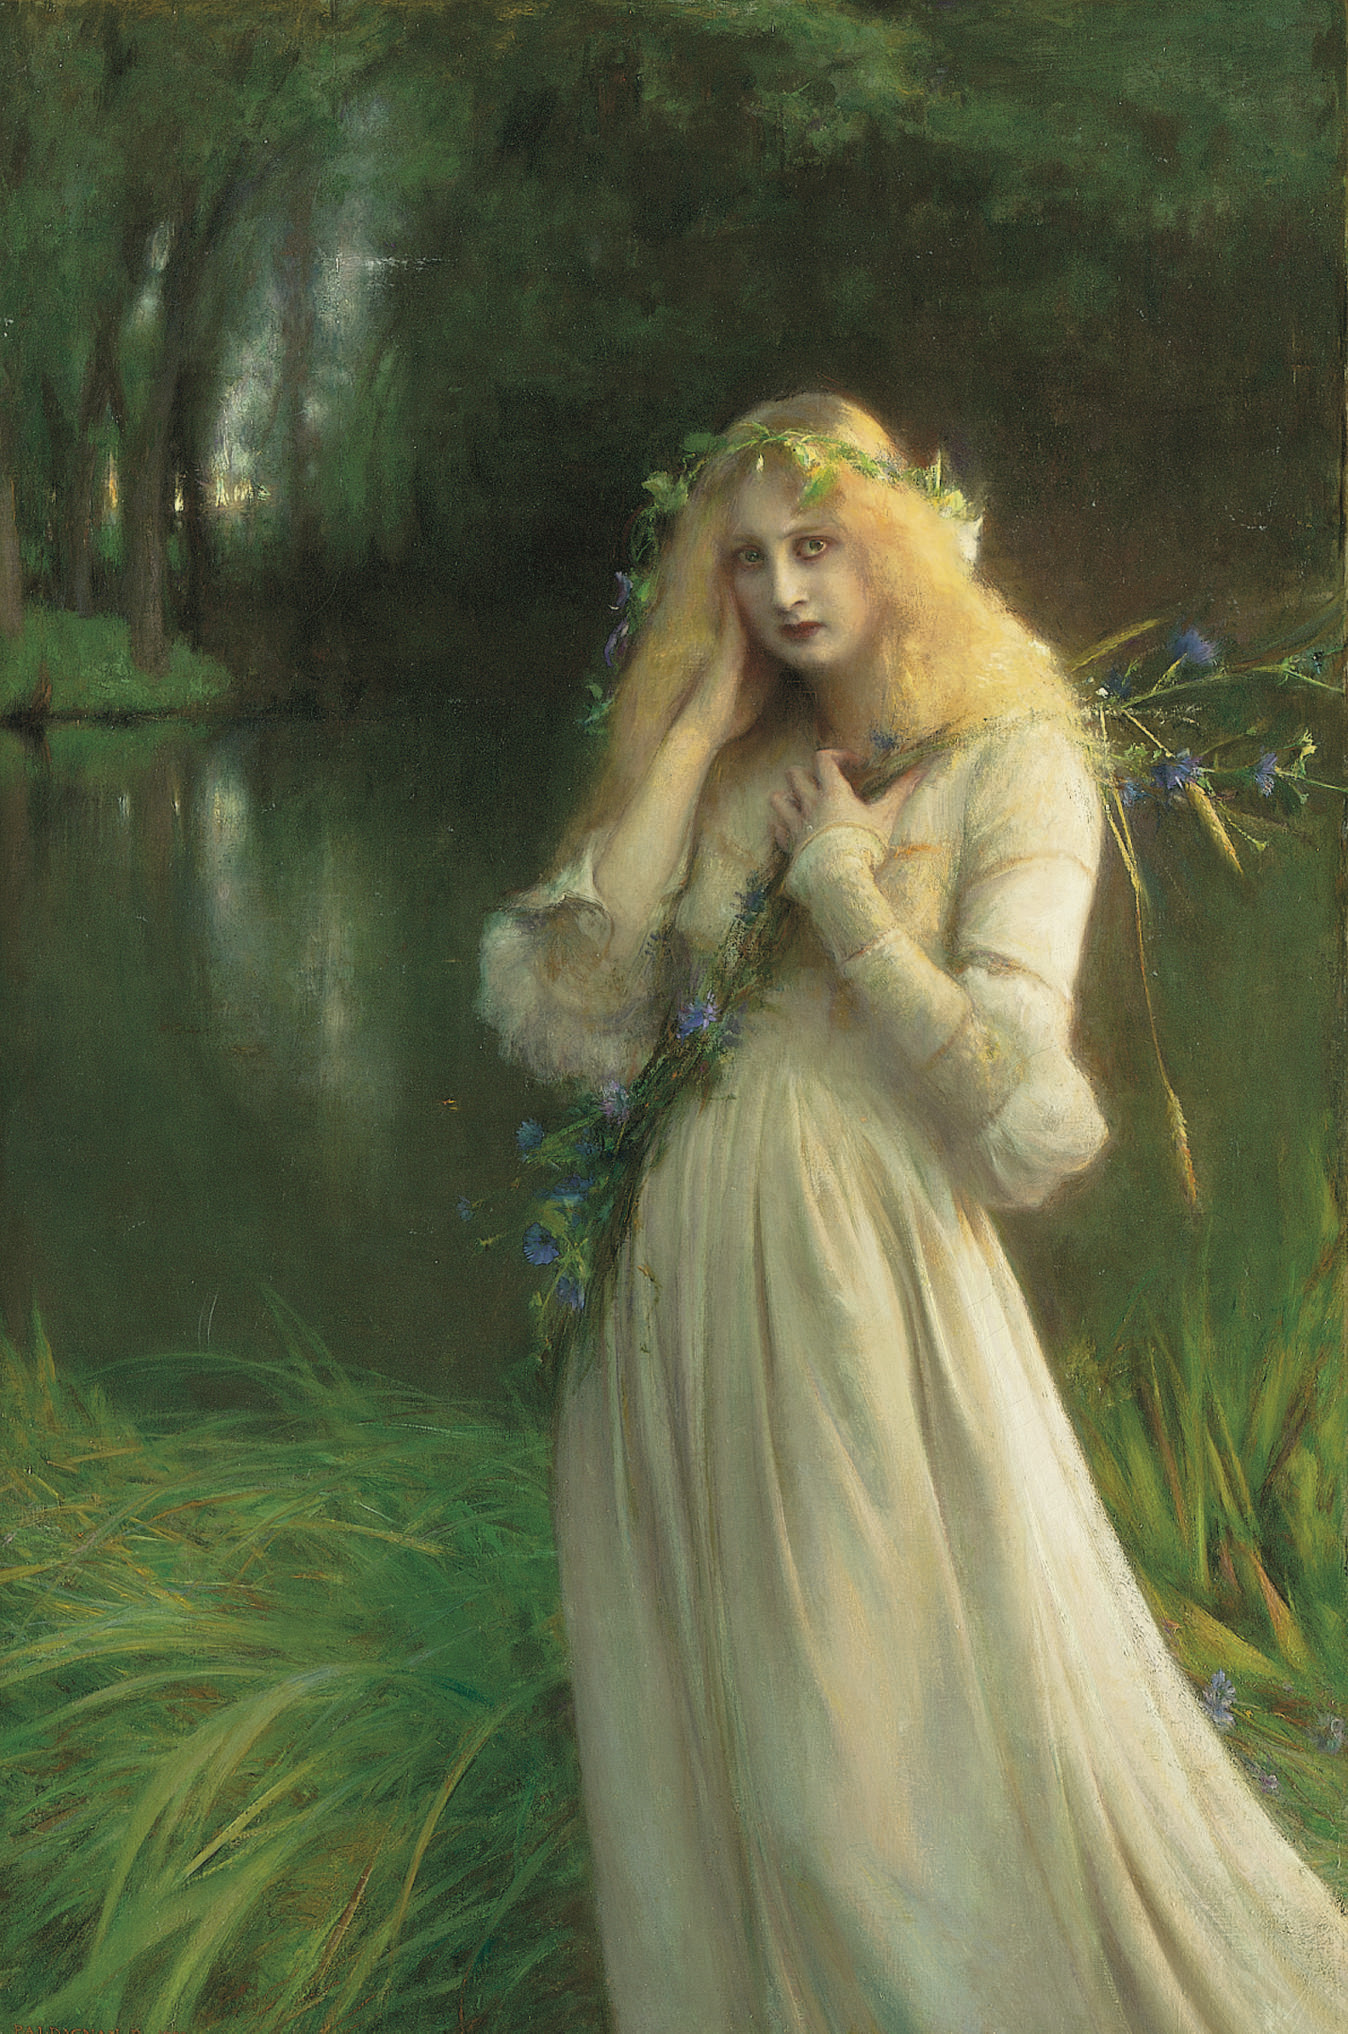 A mysterious woman carrying flowers in a forest with a lake behind her